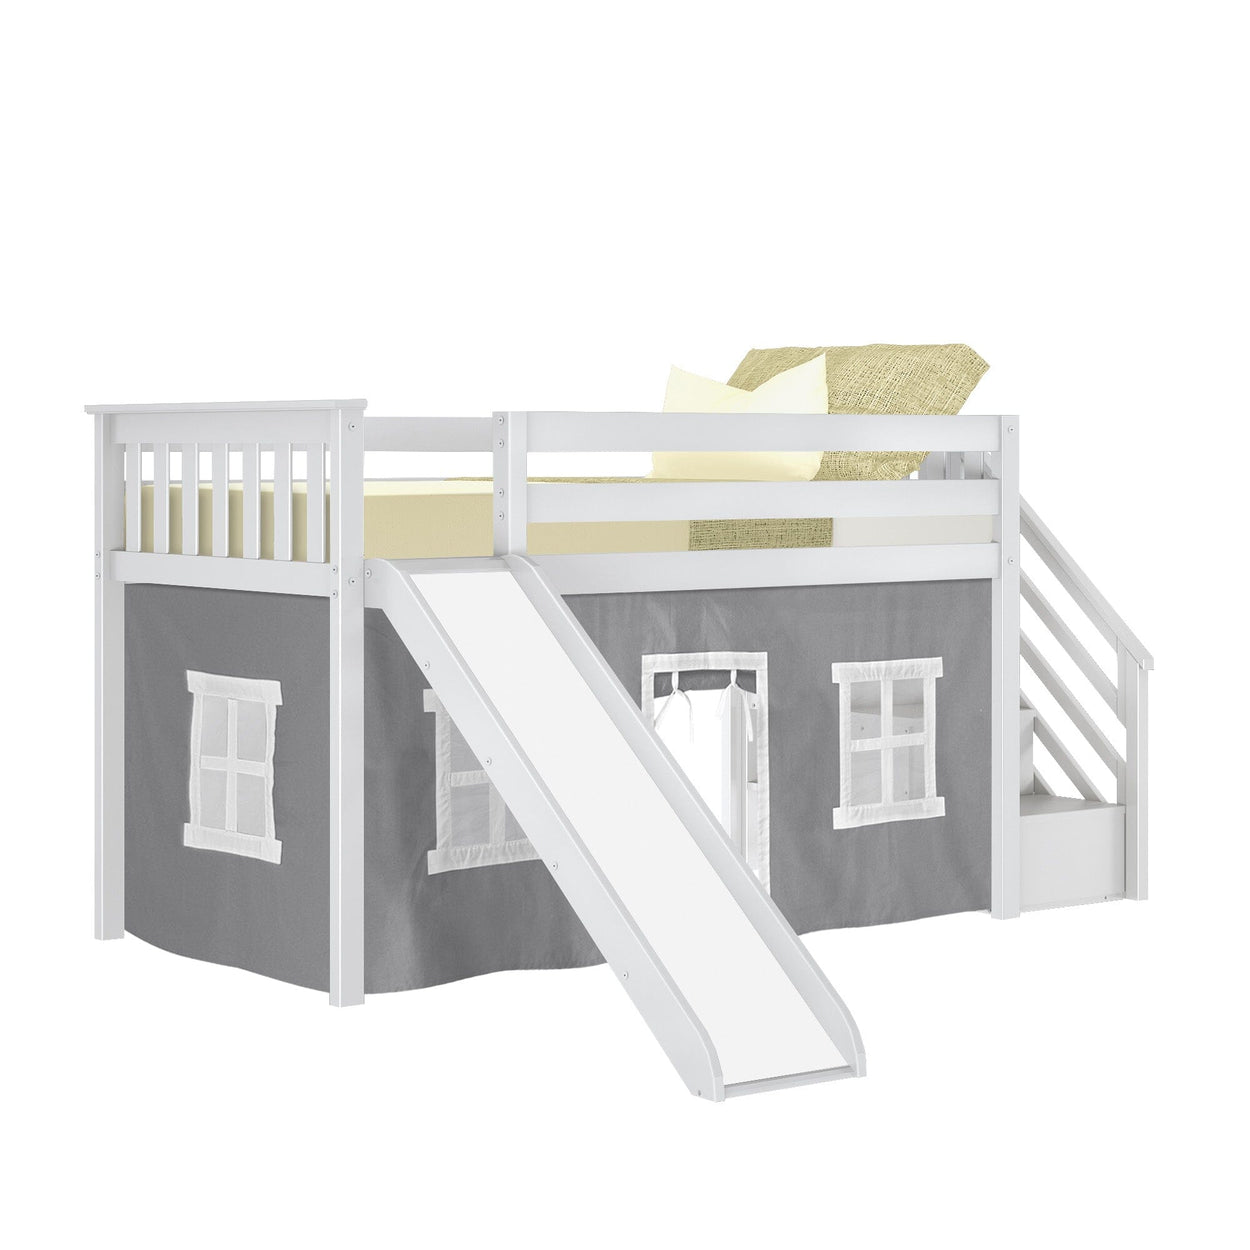 180225002054 : Loft Beds Twin Low Loft with Stairs and Slide with Curtains, White + Grey Curtain